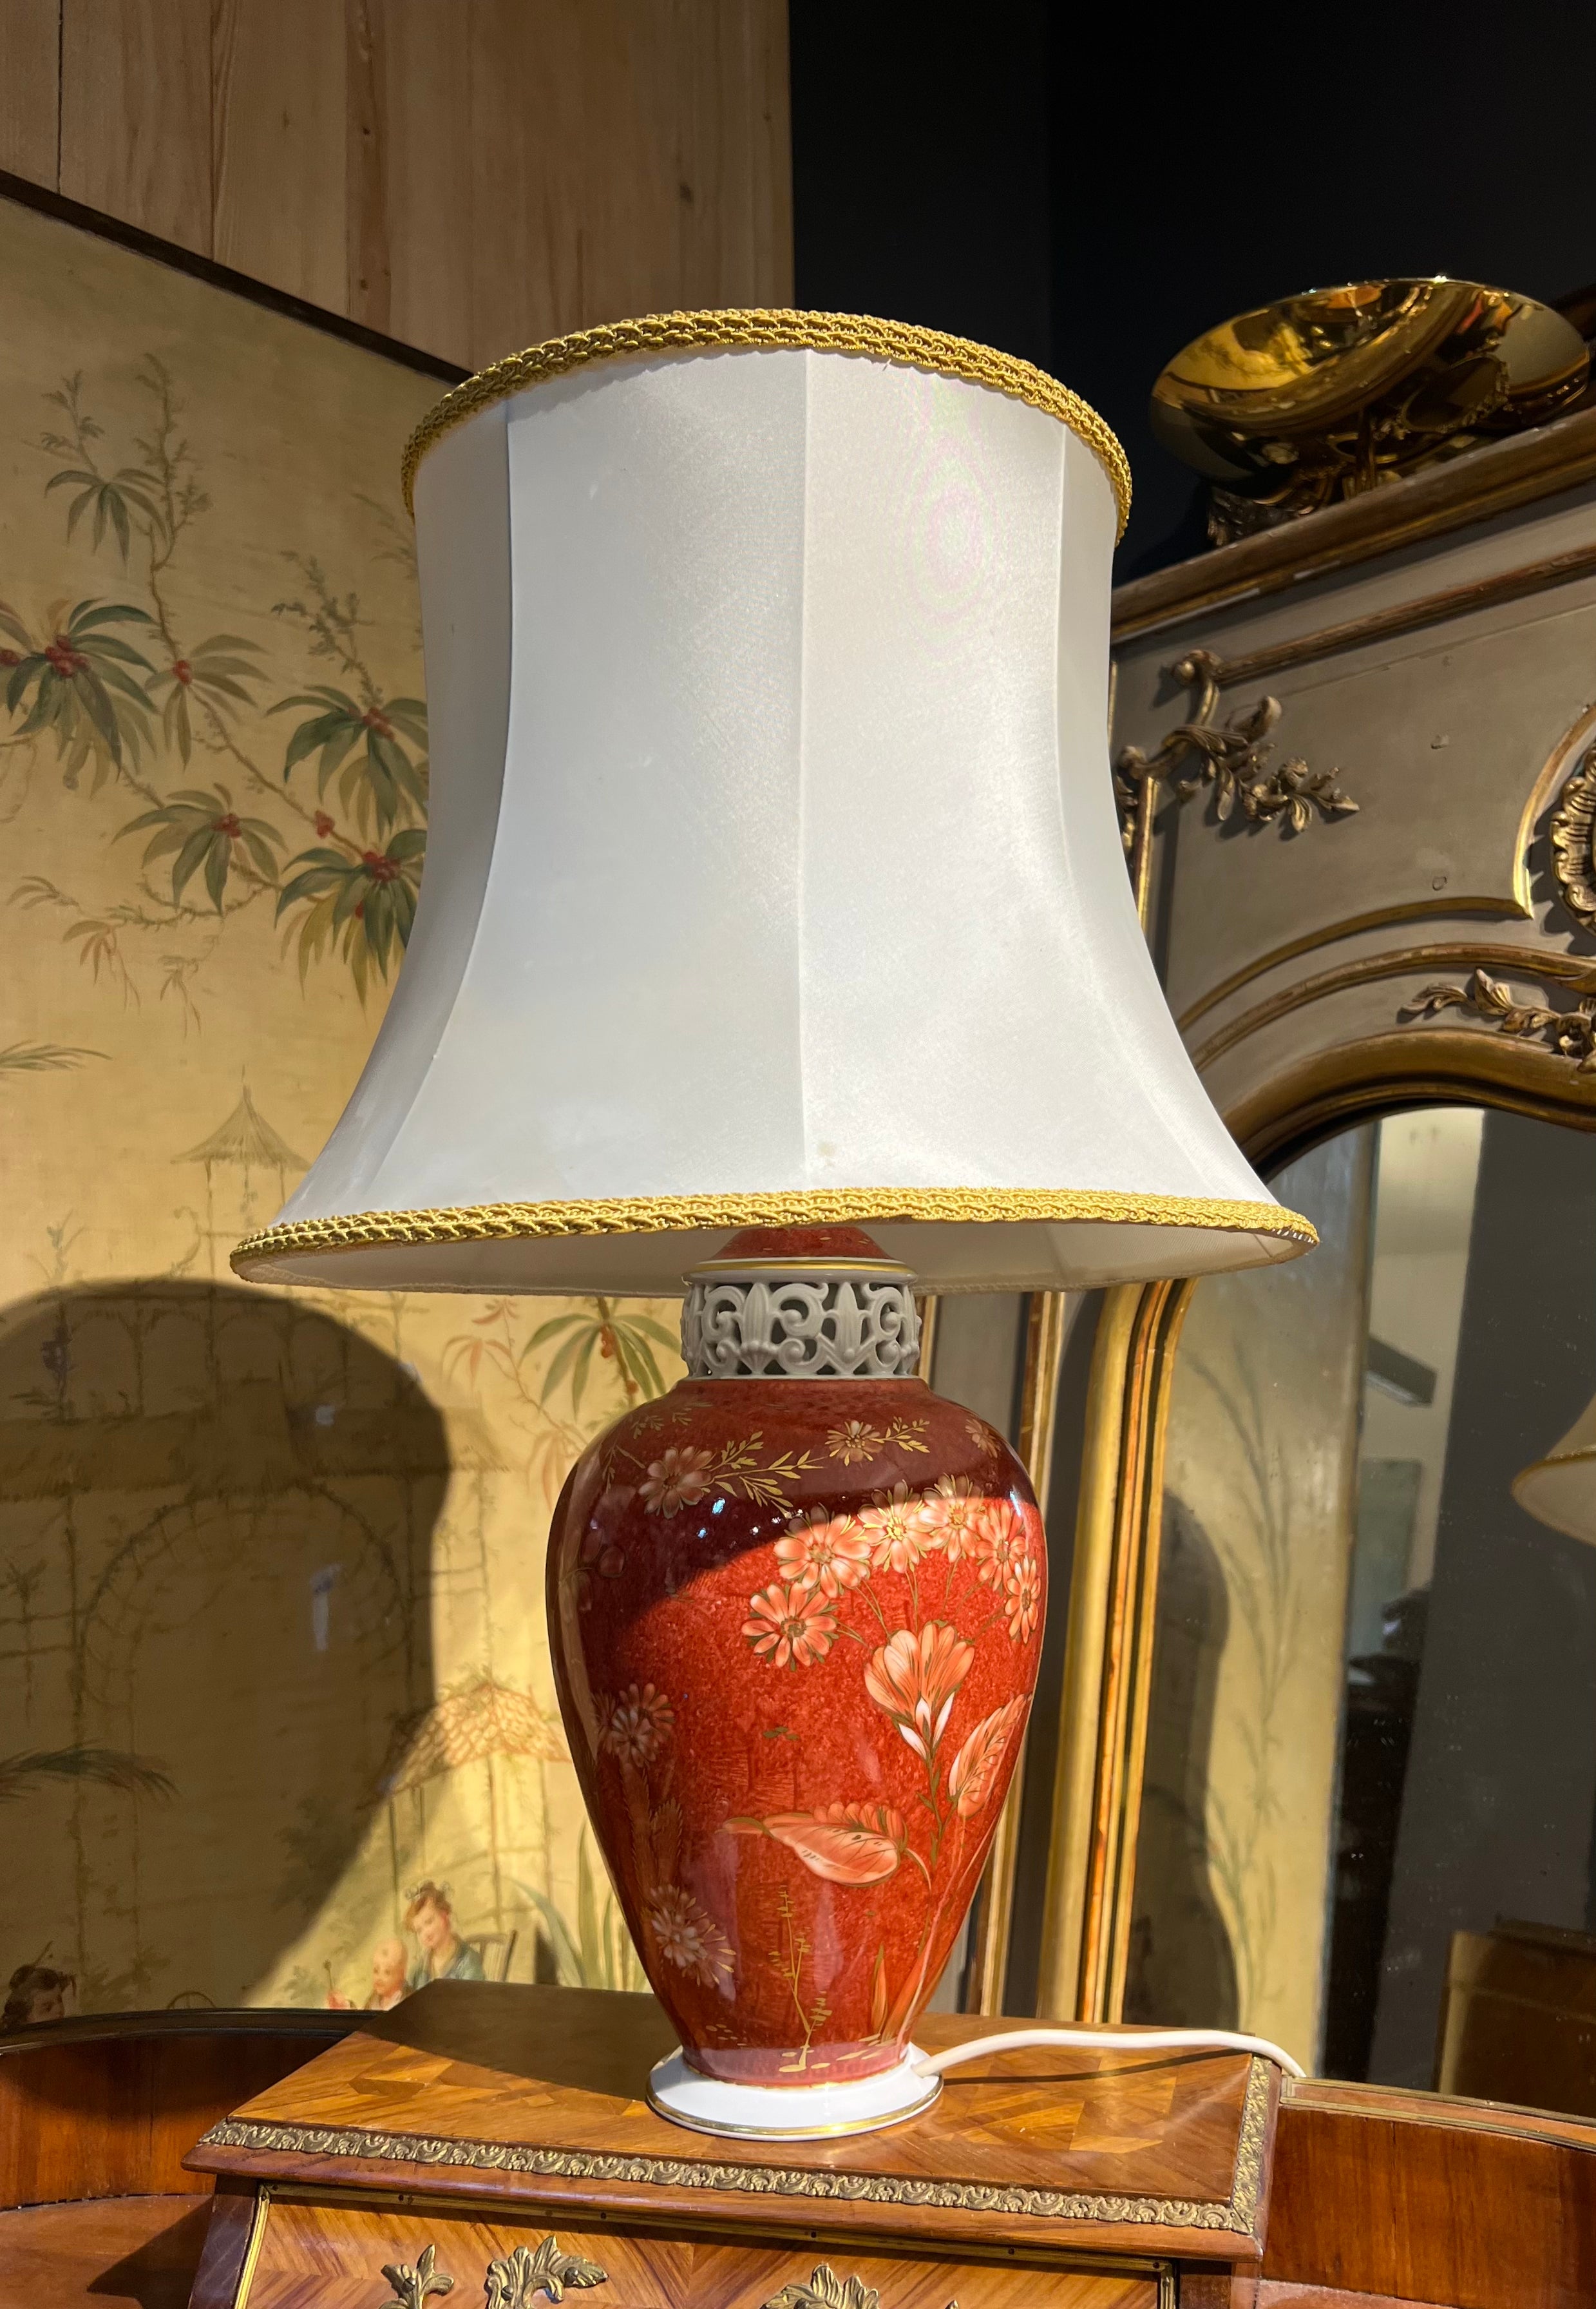 20th Century hand painted red ceramic table lamp with floral decorations by Rosenthal in very good authentic condition.
Measurements without the shade 40/20 and 62/45 cm.
Germany, circa 1920

